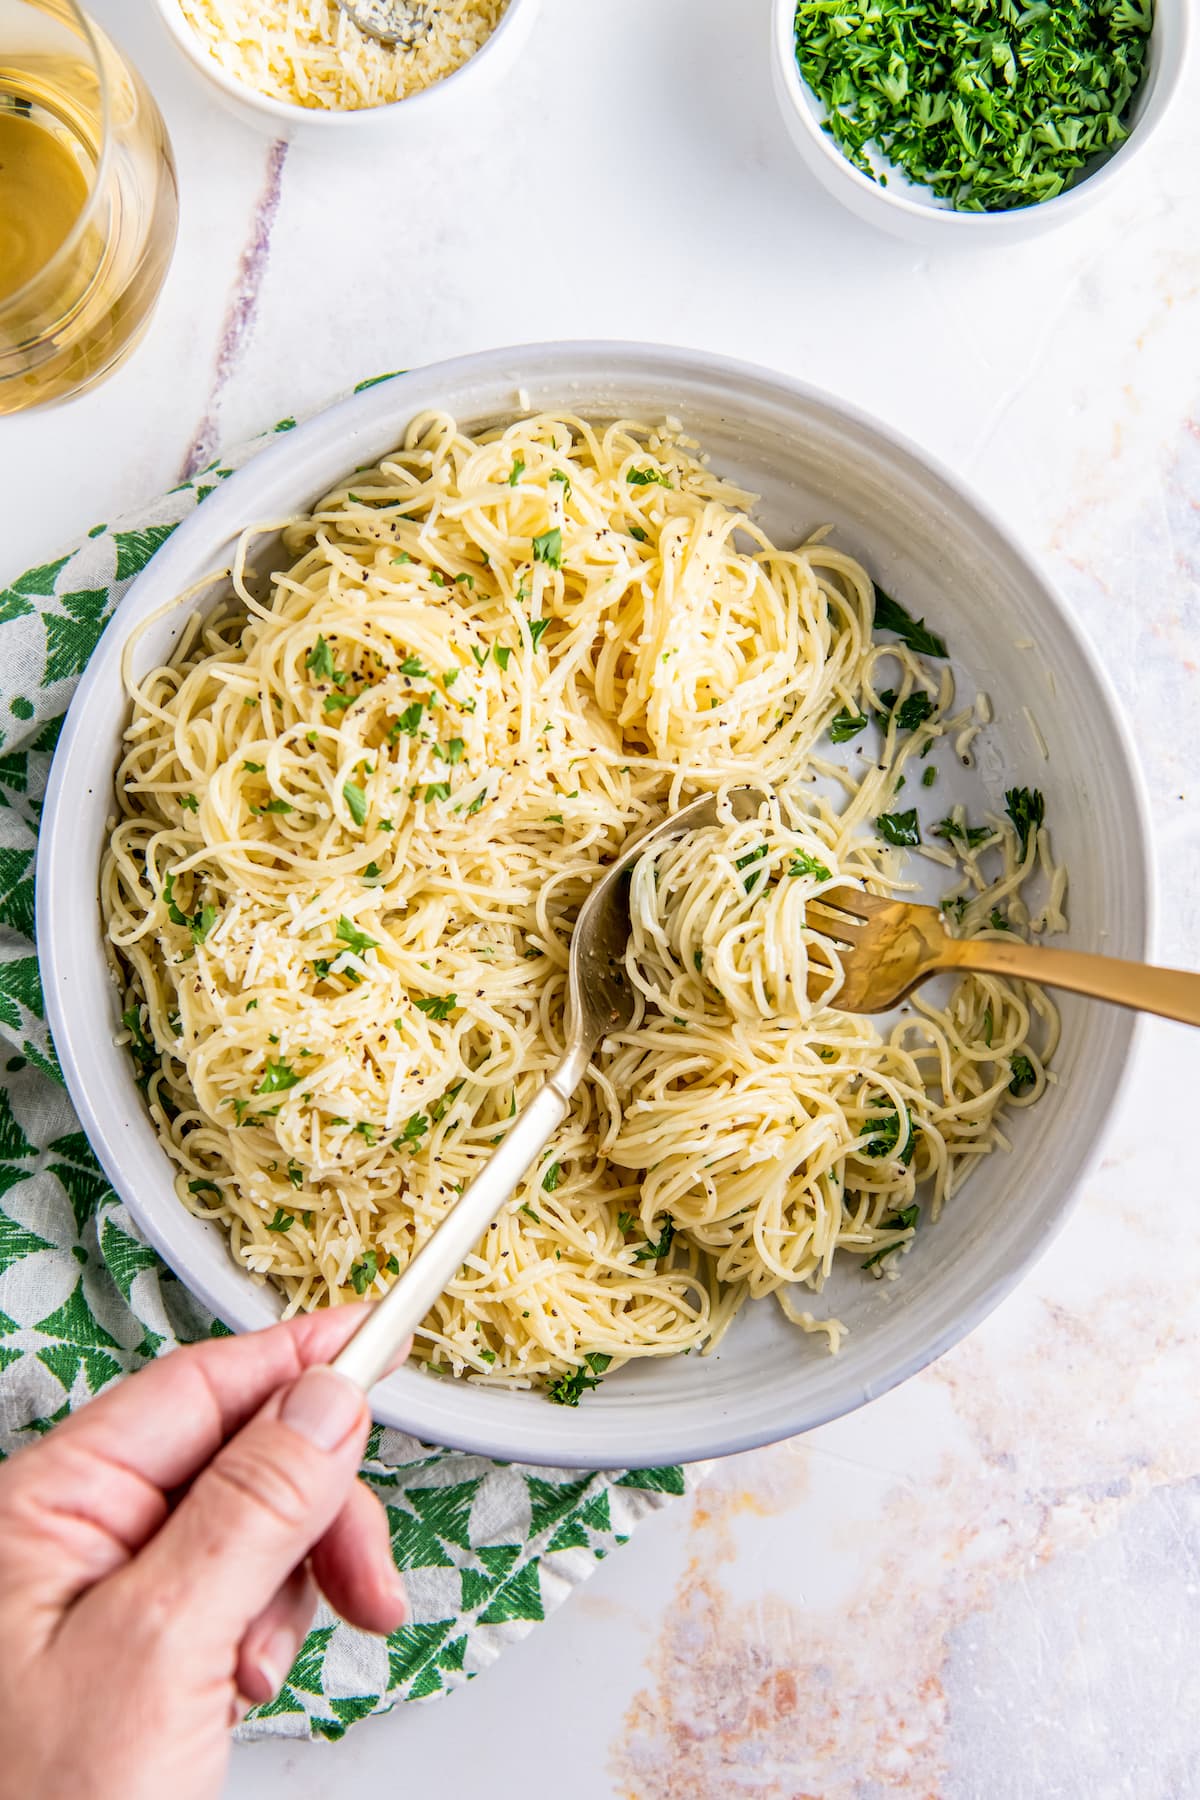 A bowl of buttery noodles is ready to eat.